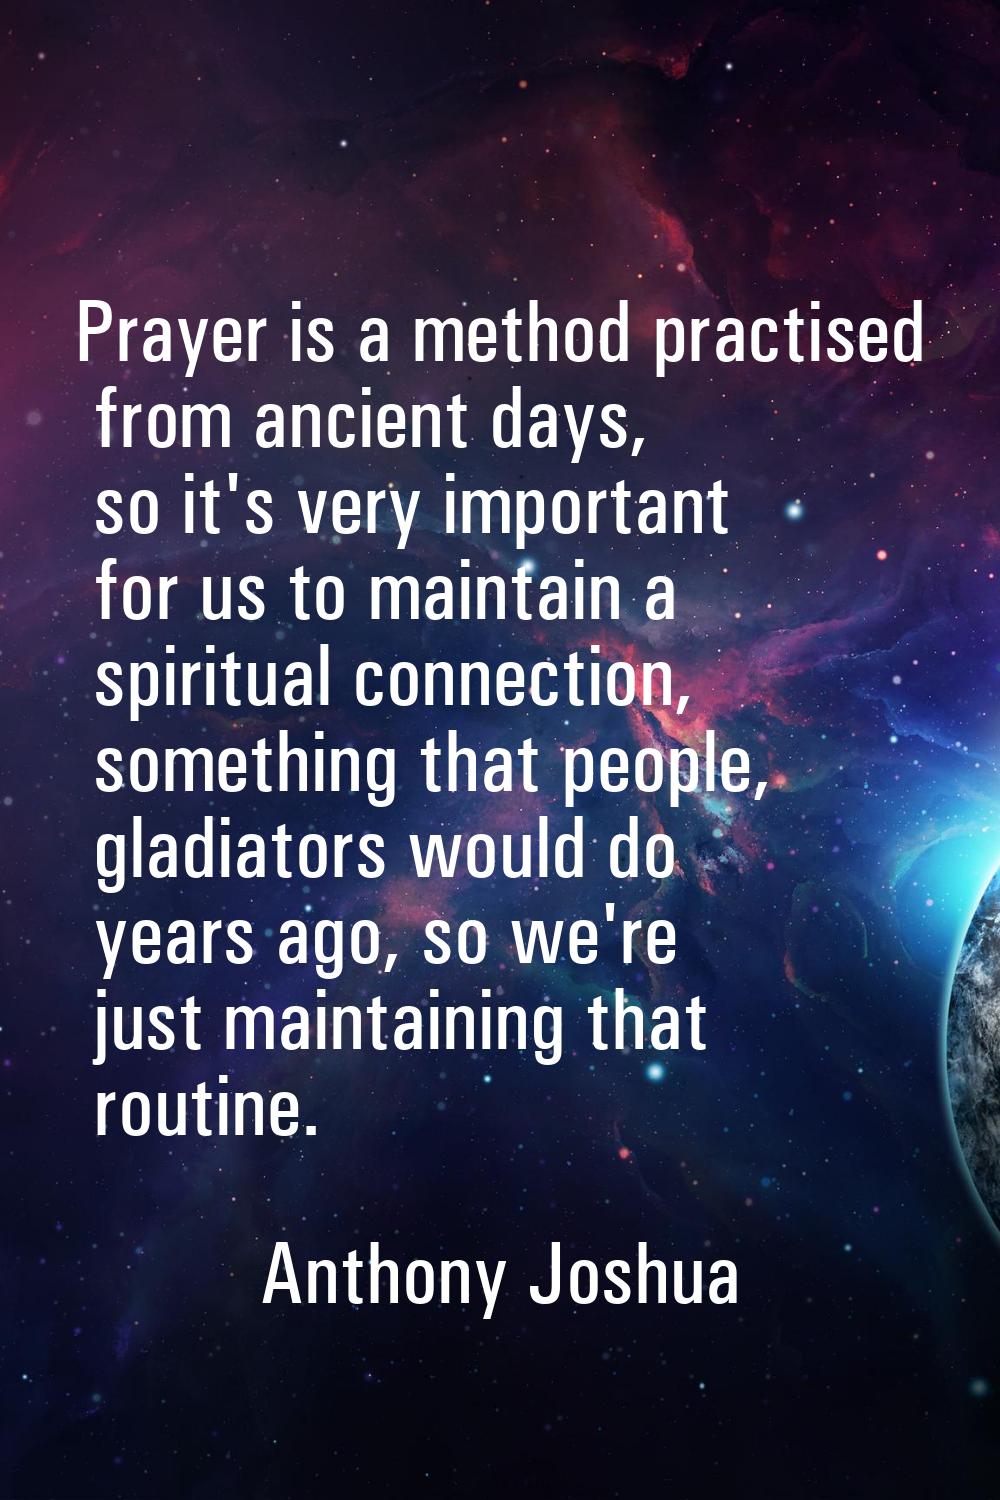 Prayer is a method practised from ancient days, so it's very important for us to maintain a spiritu